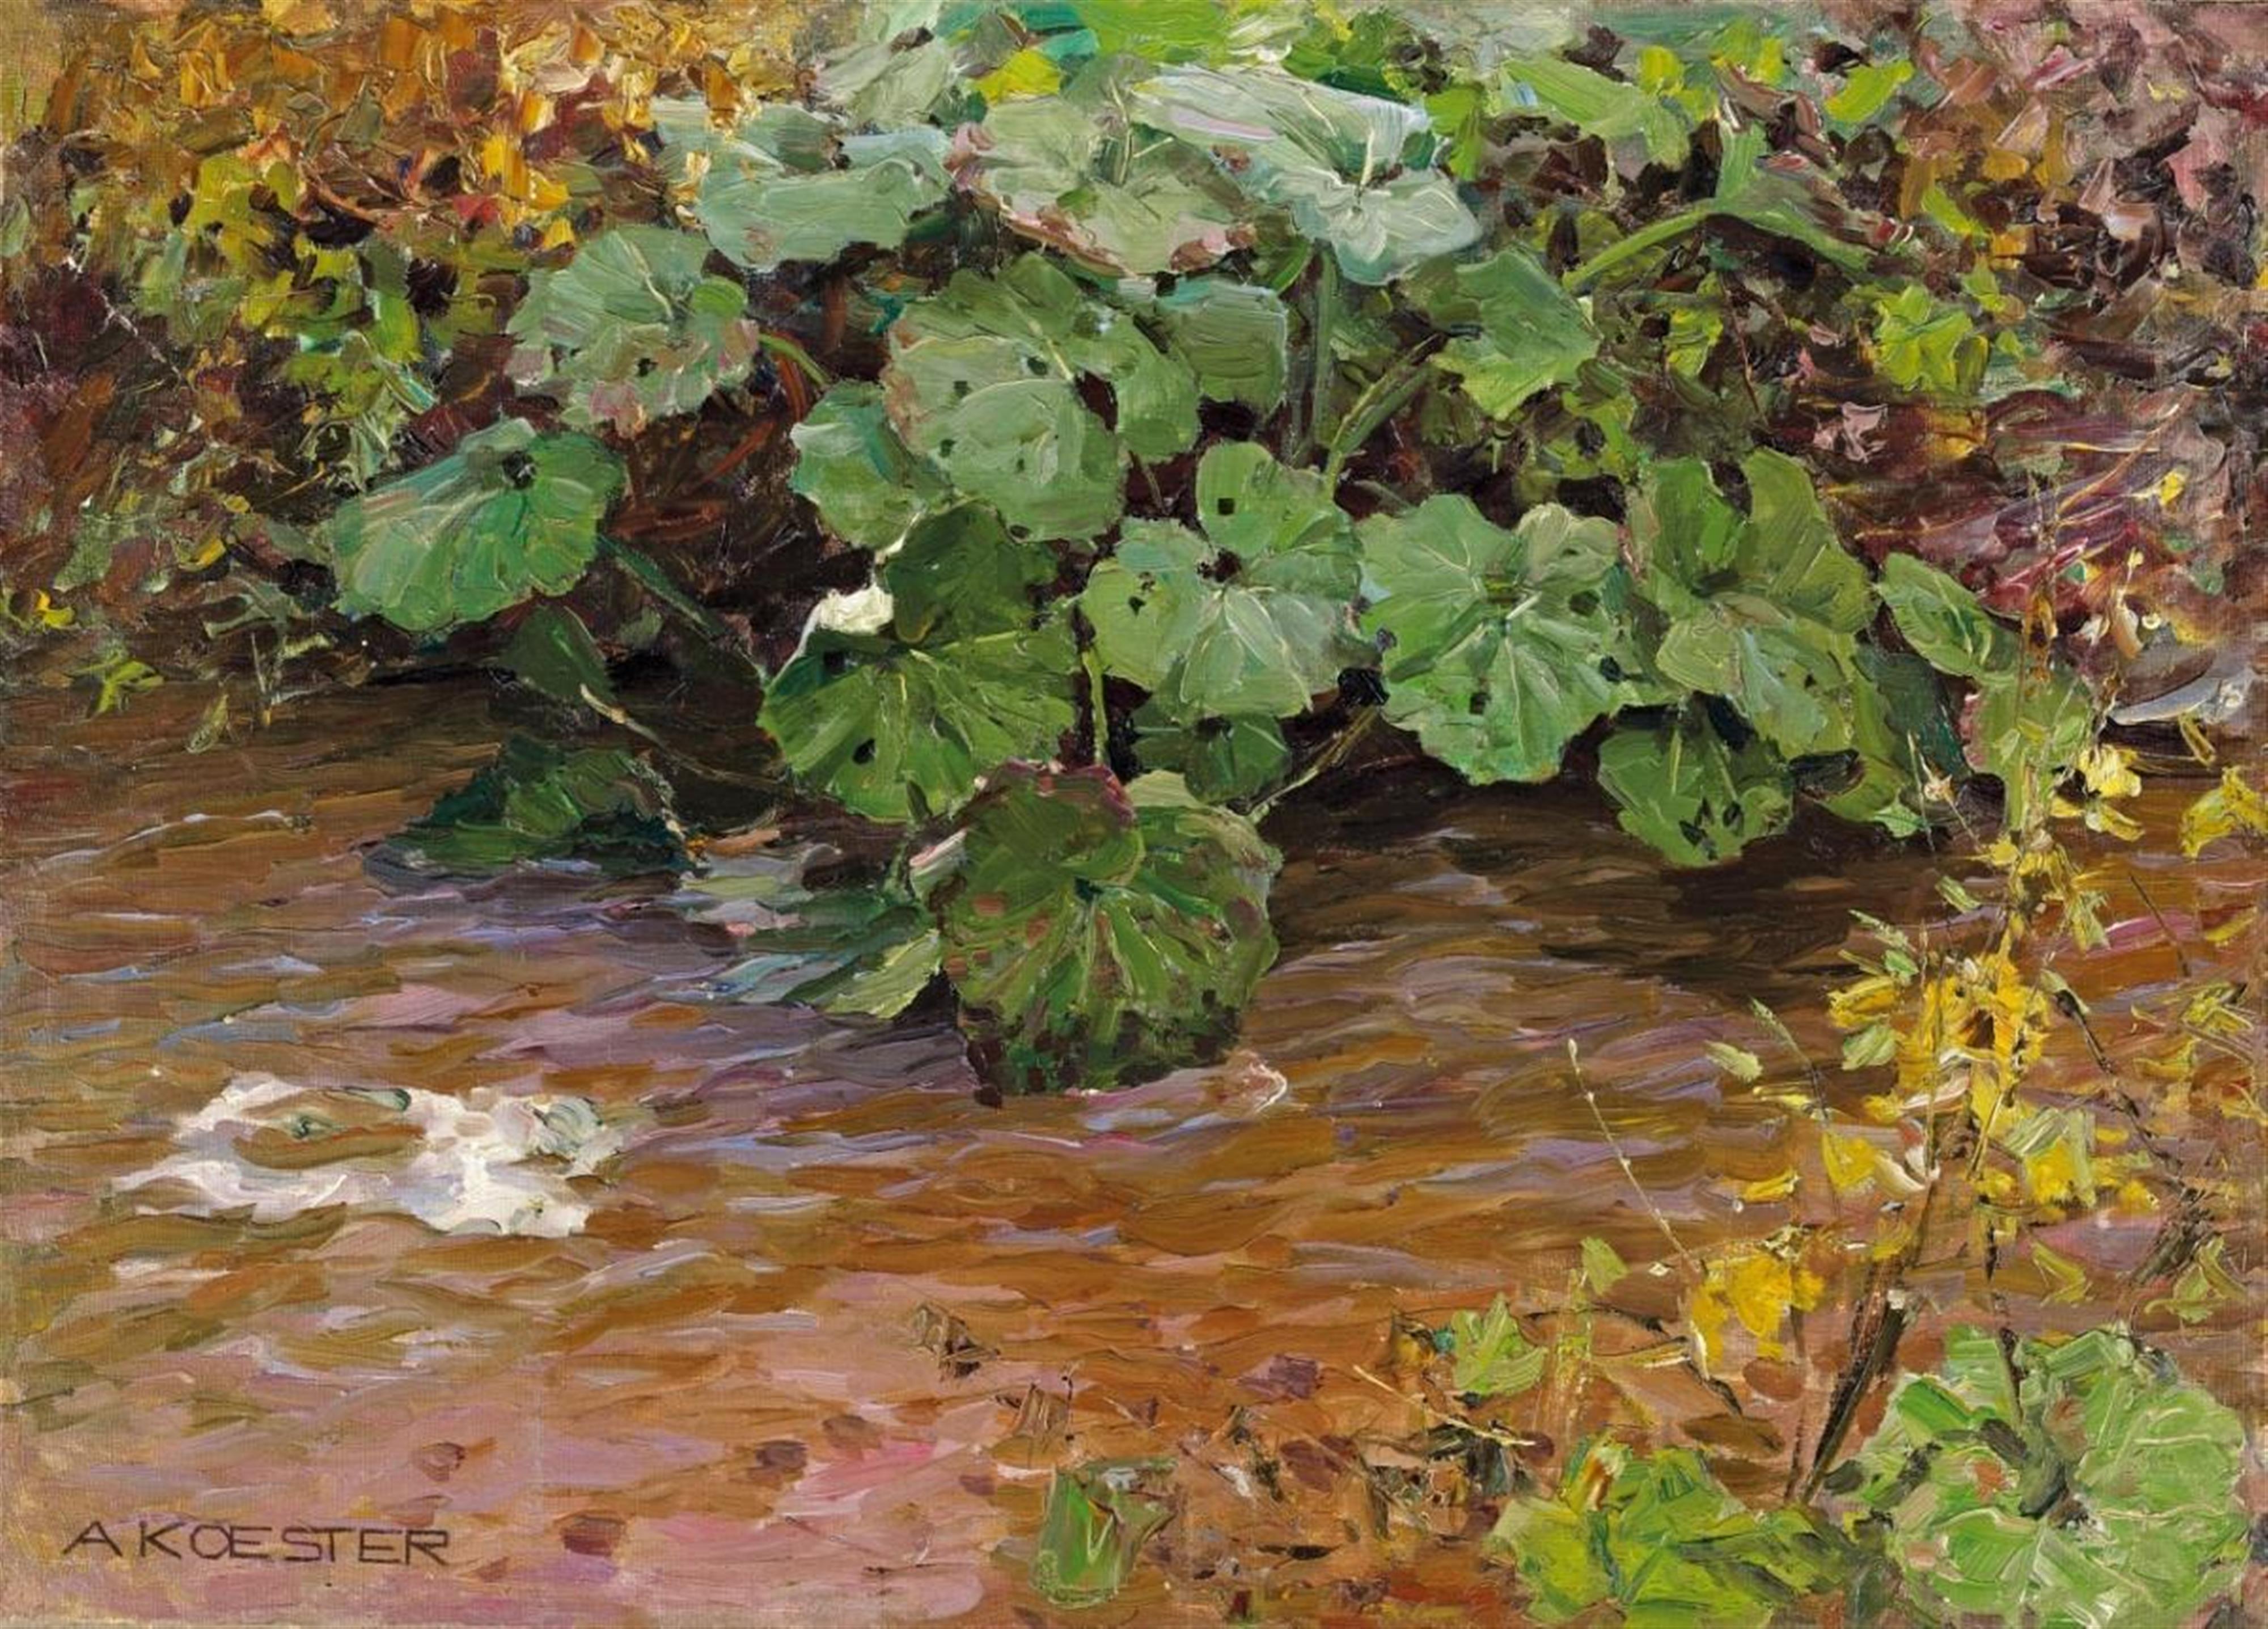 Alexander Koester - PLANT IN THE WATER - image-1